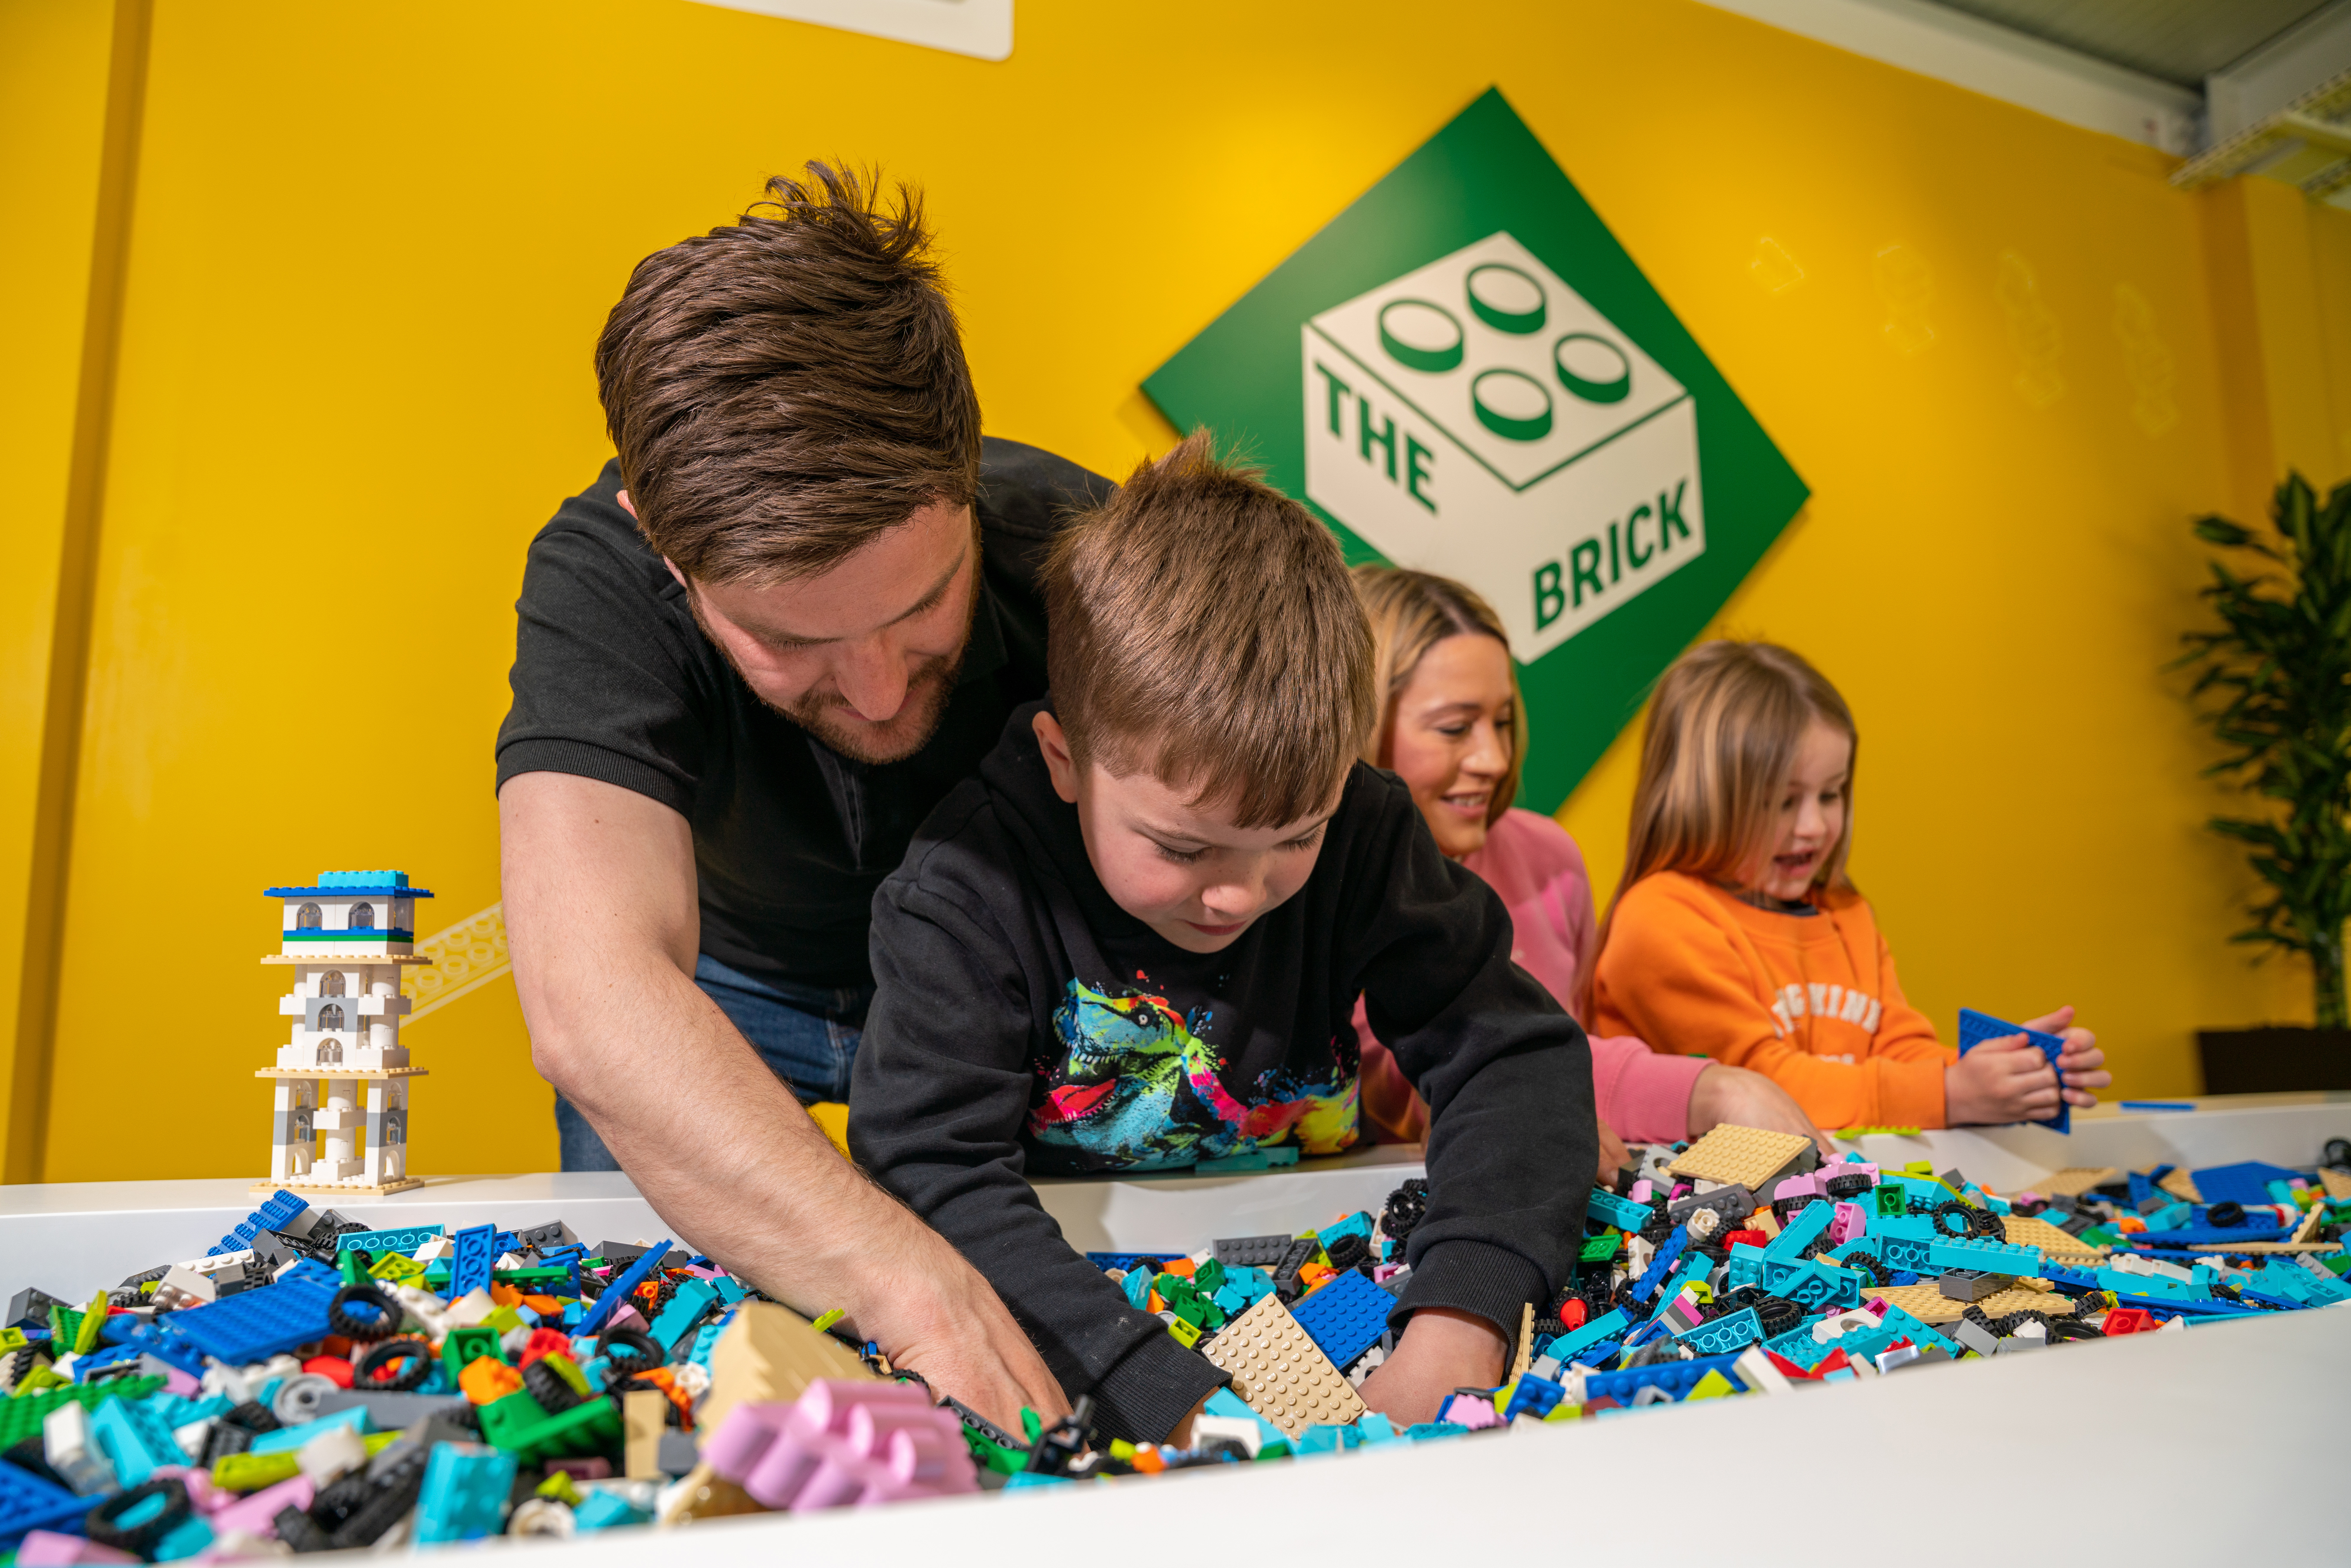 Families building with LEGO bricks in The Brick